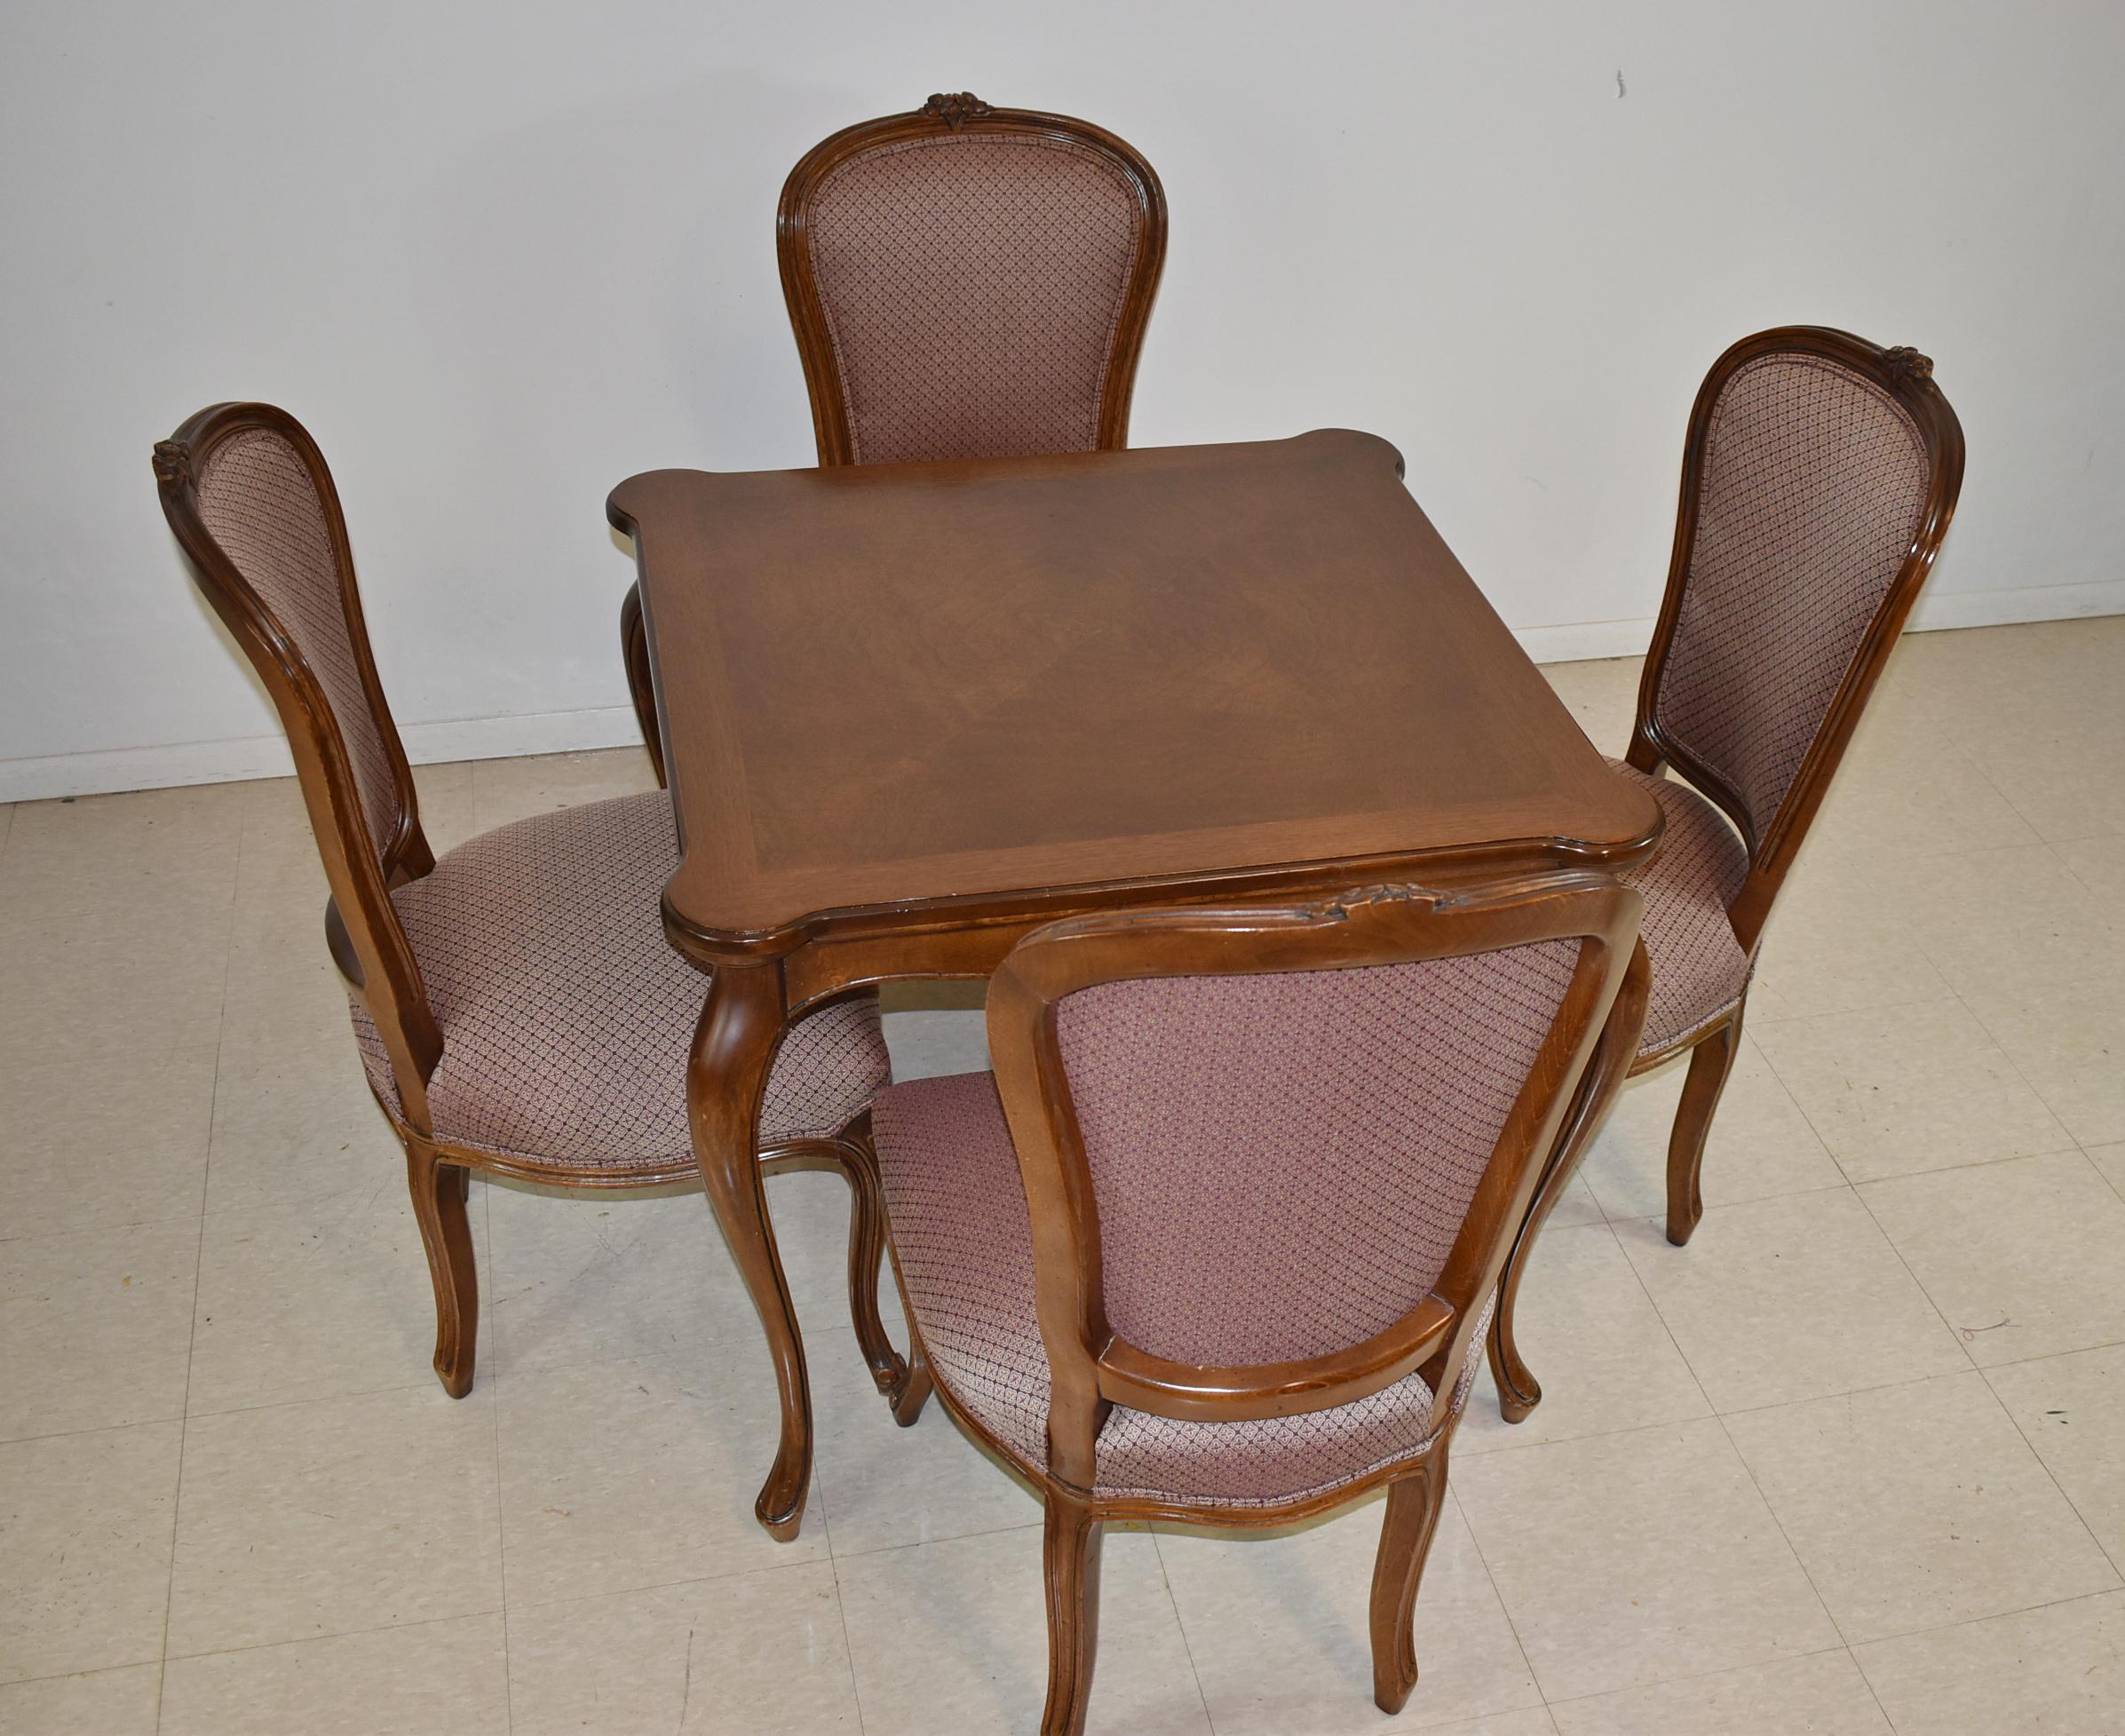 Provincial style Ethan Allen game table and four chairs. Four cup holders or hand carved floral details.